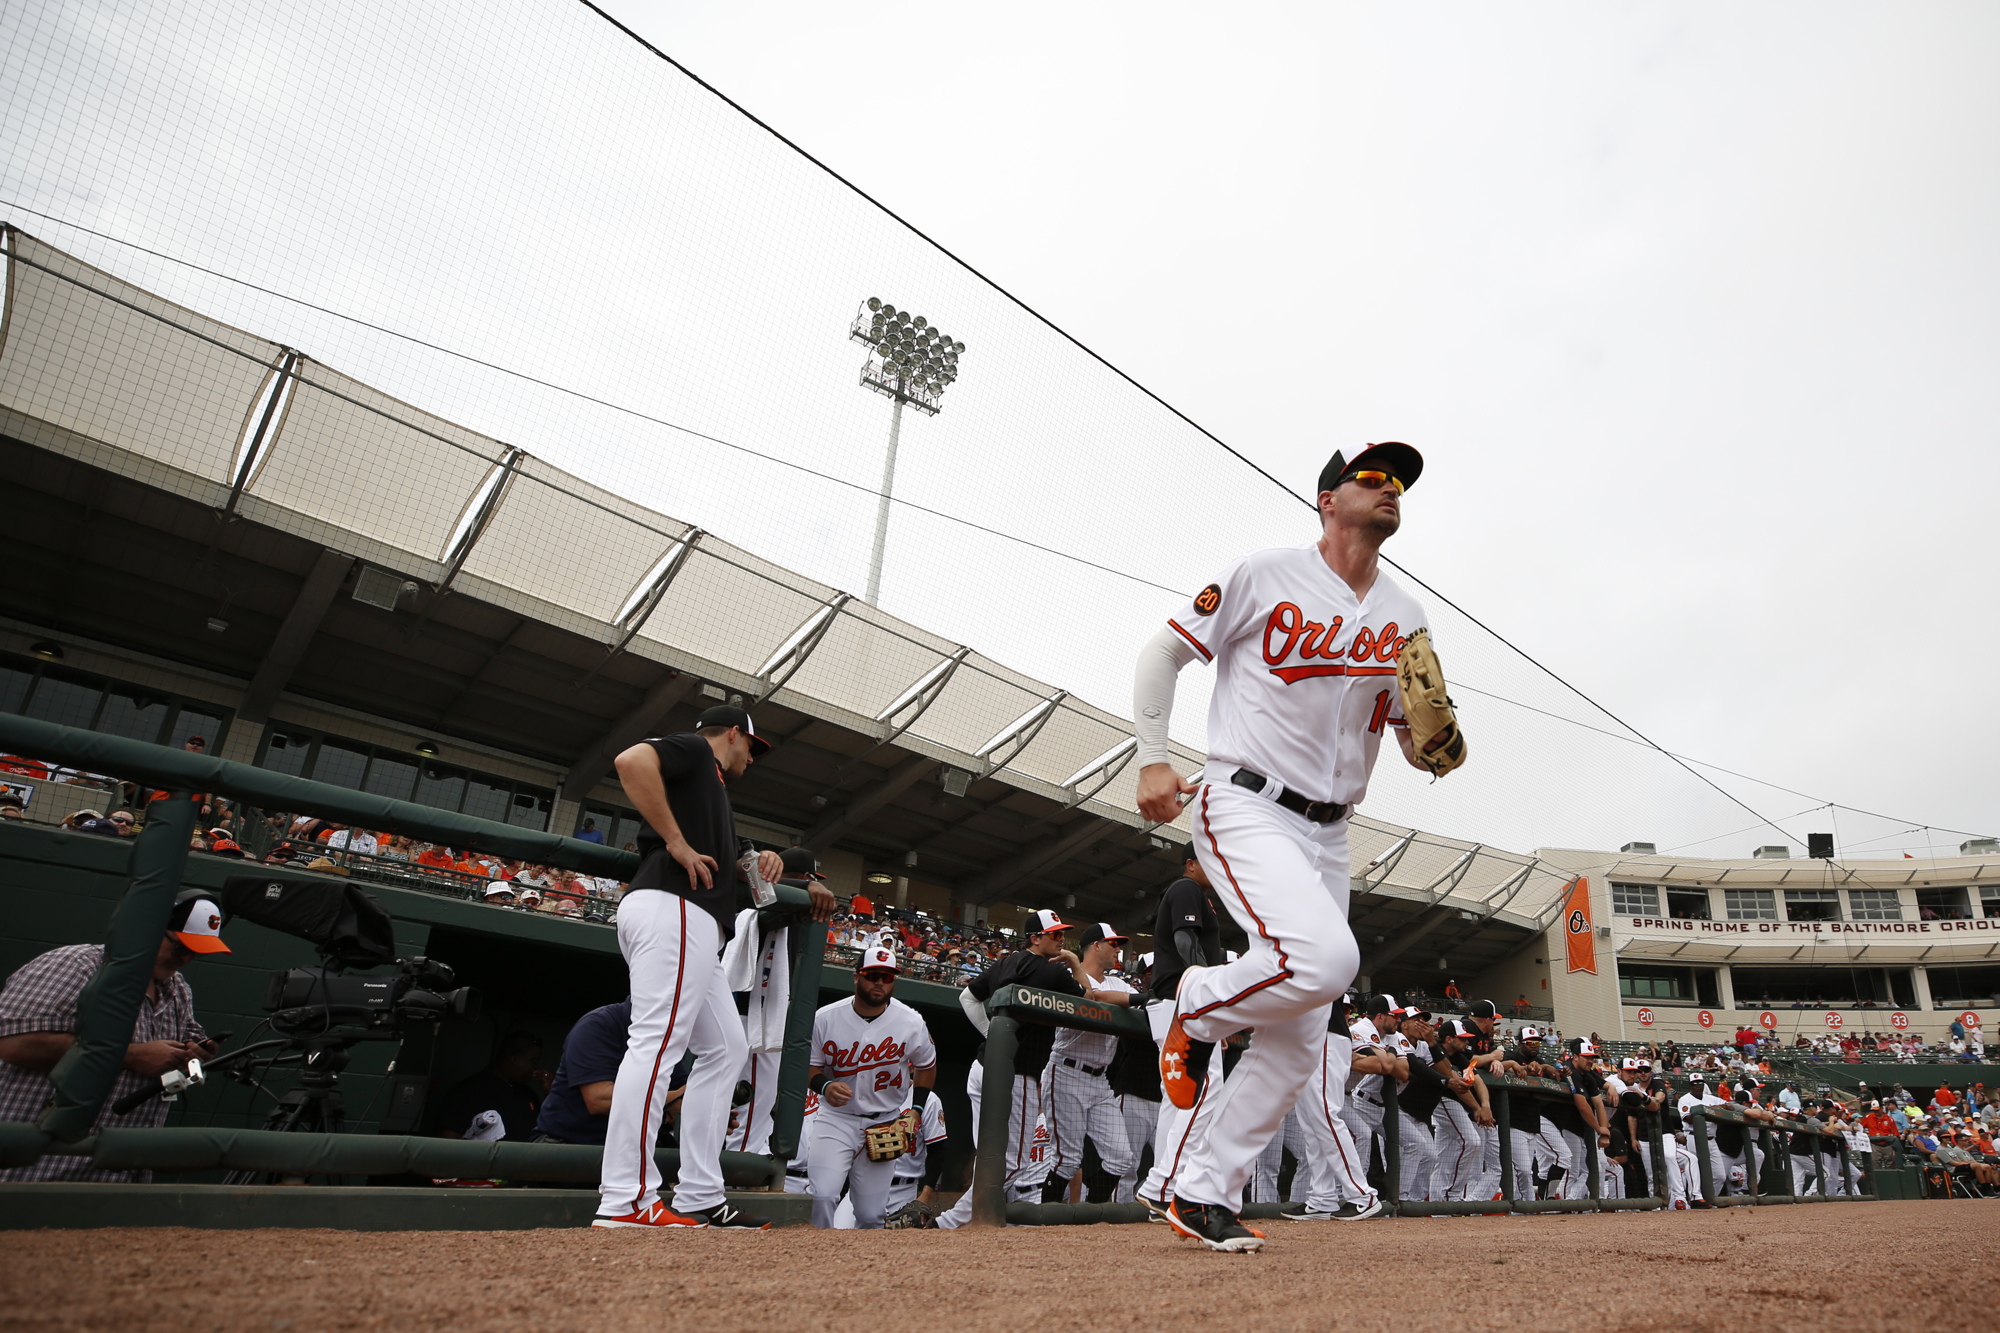 Trey Mancini, seen taking the field during the 2020 Spring Training season, has been with Baltimore through the dregs of recent seasons and remained a bright sport. (Photo courtesy of Todd Olszewski/Baltimore Orioles)